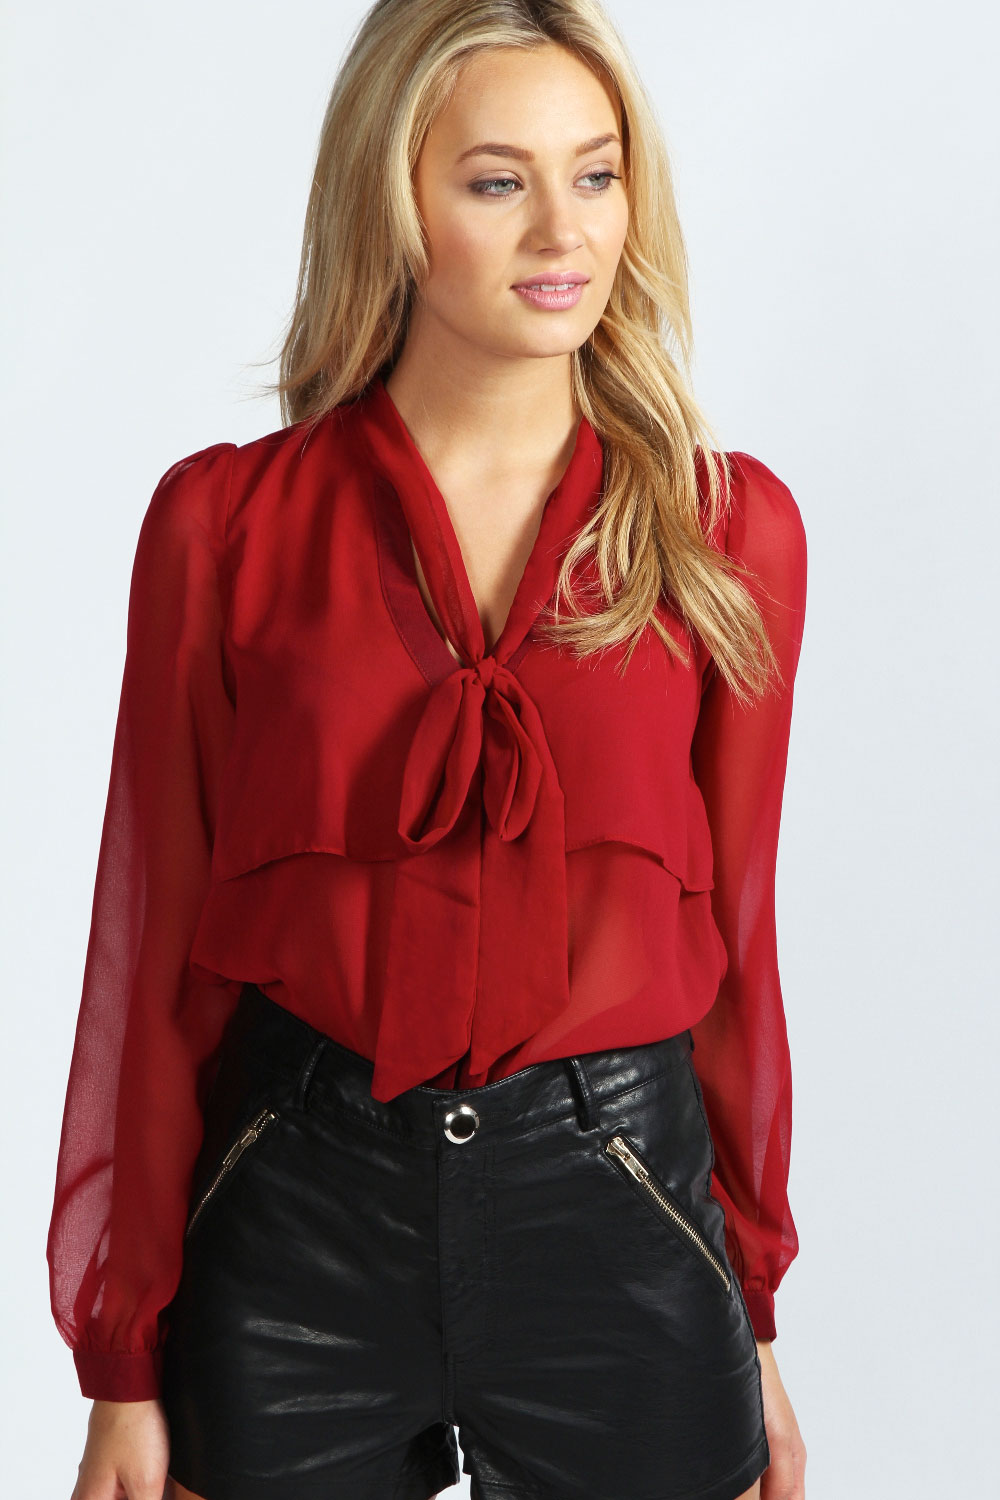 boohoo Lily Long Sleeve Pussybow Blouse - wine, wine